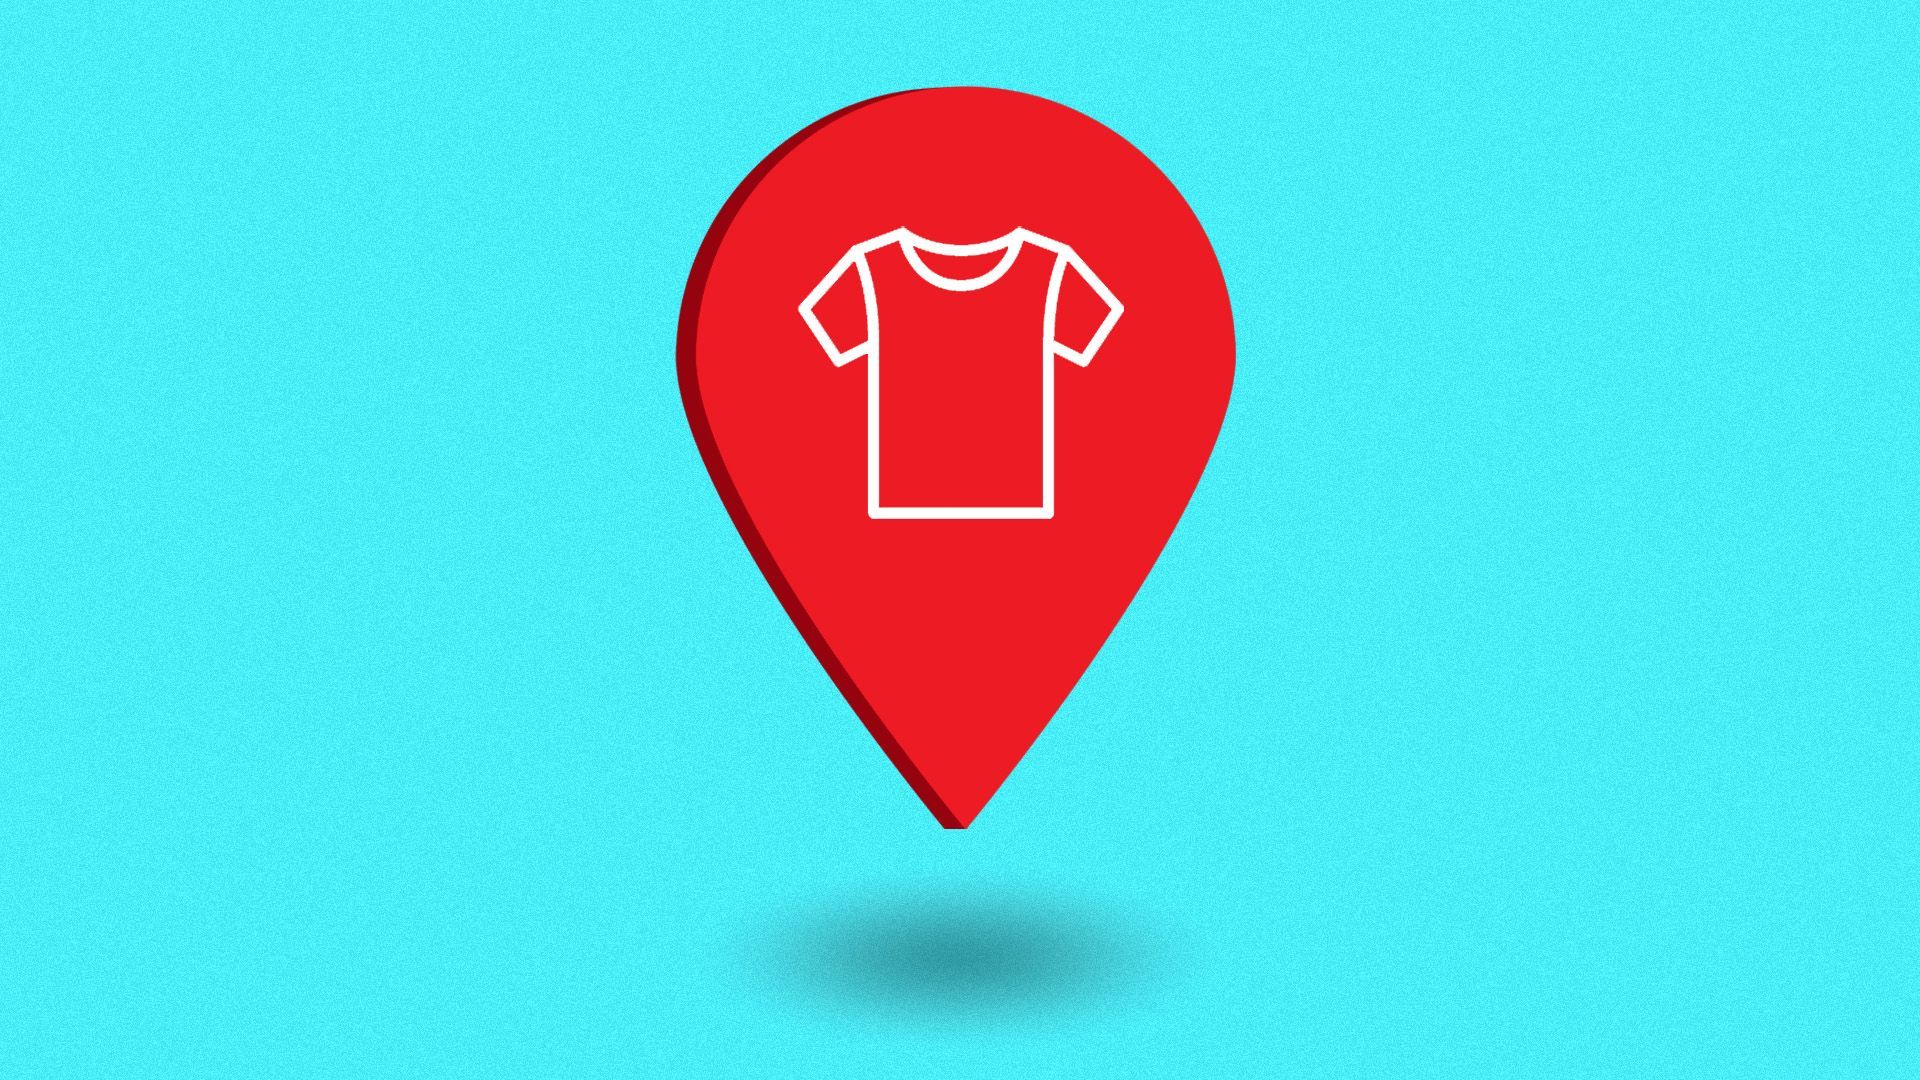 Illustration of a location pin icon with a T-shirt in the center.